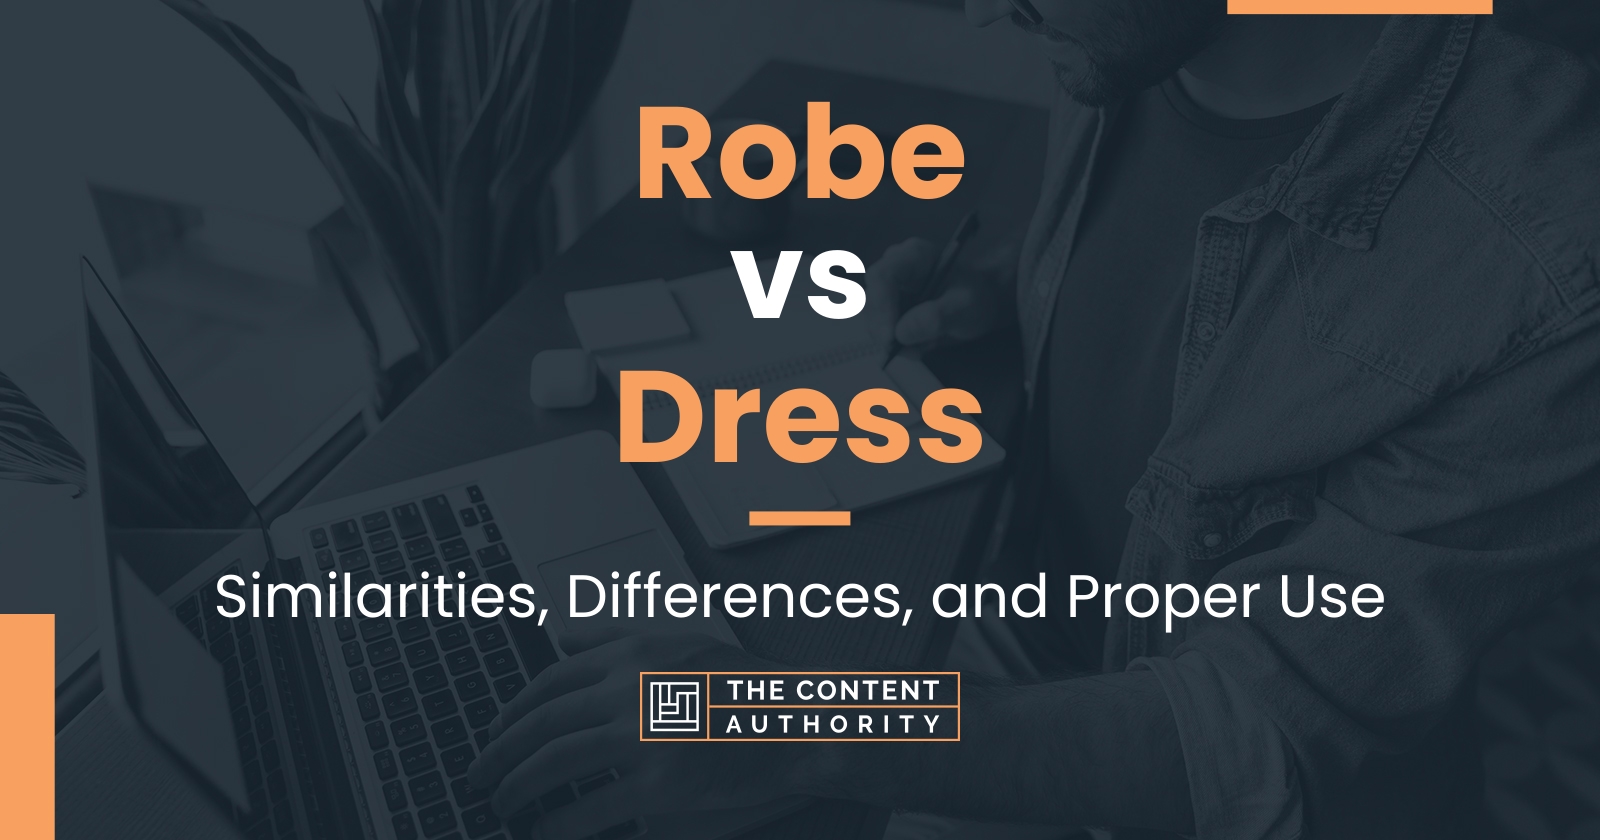 Robe vs Dress: Similarities, Differences, and Proper Use